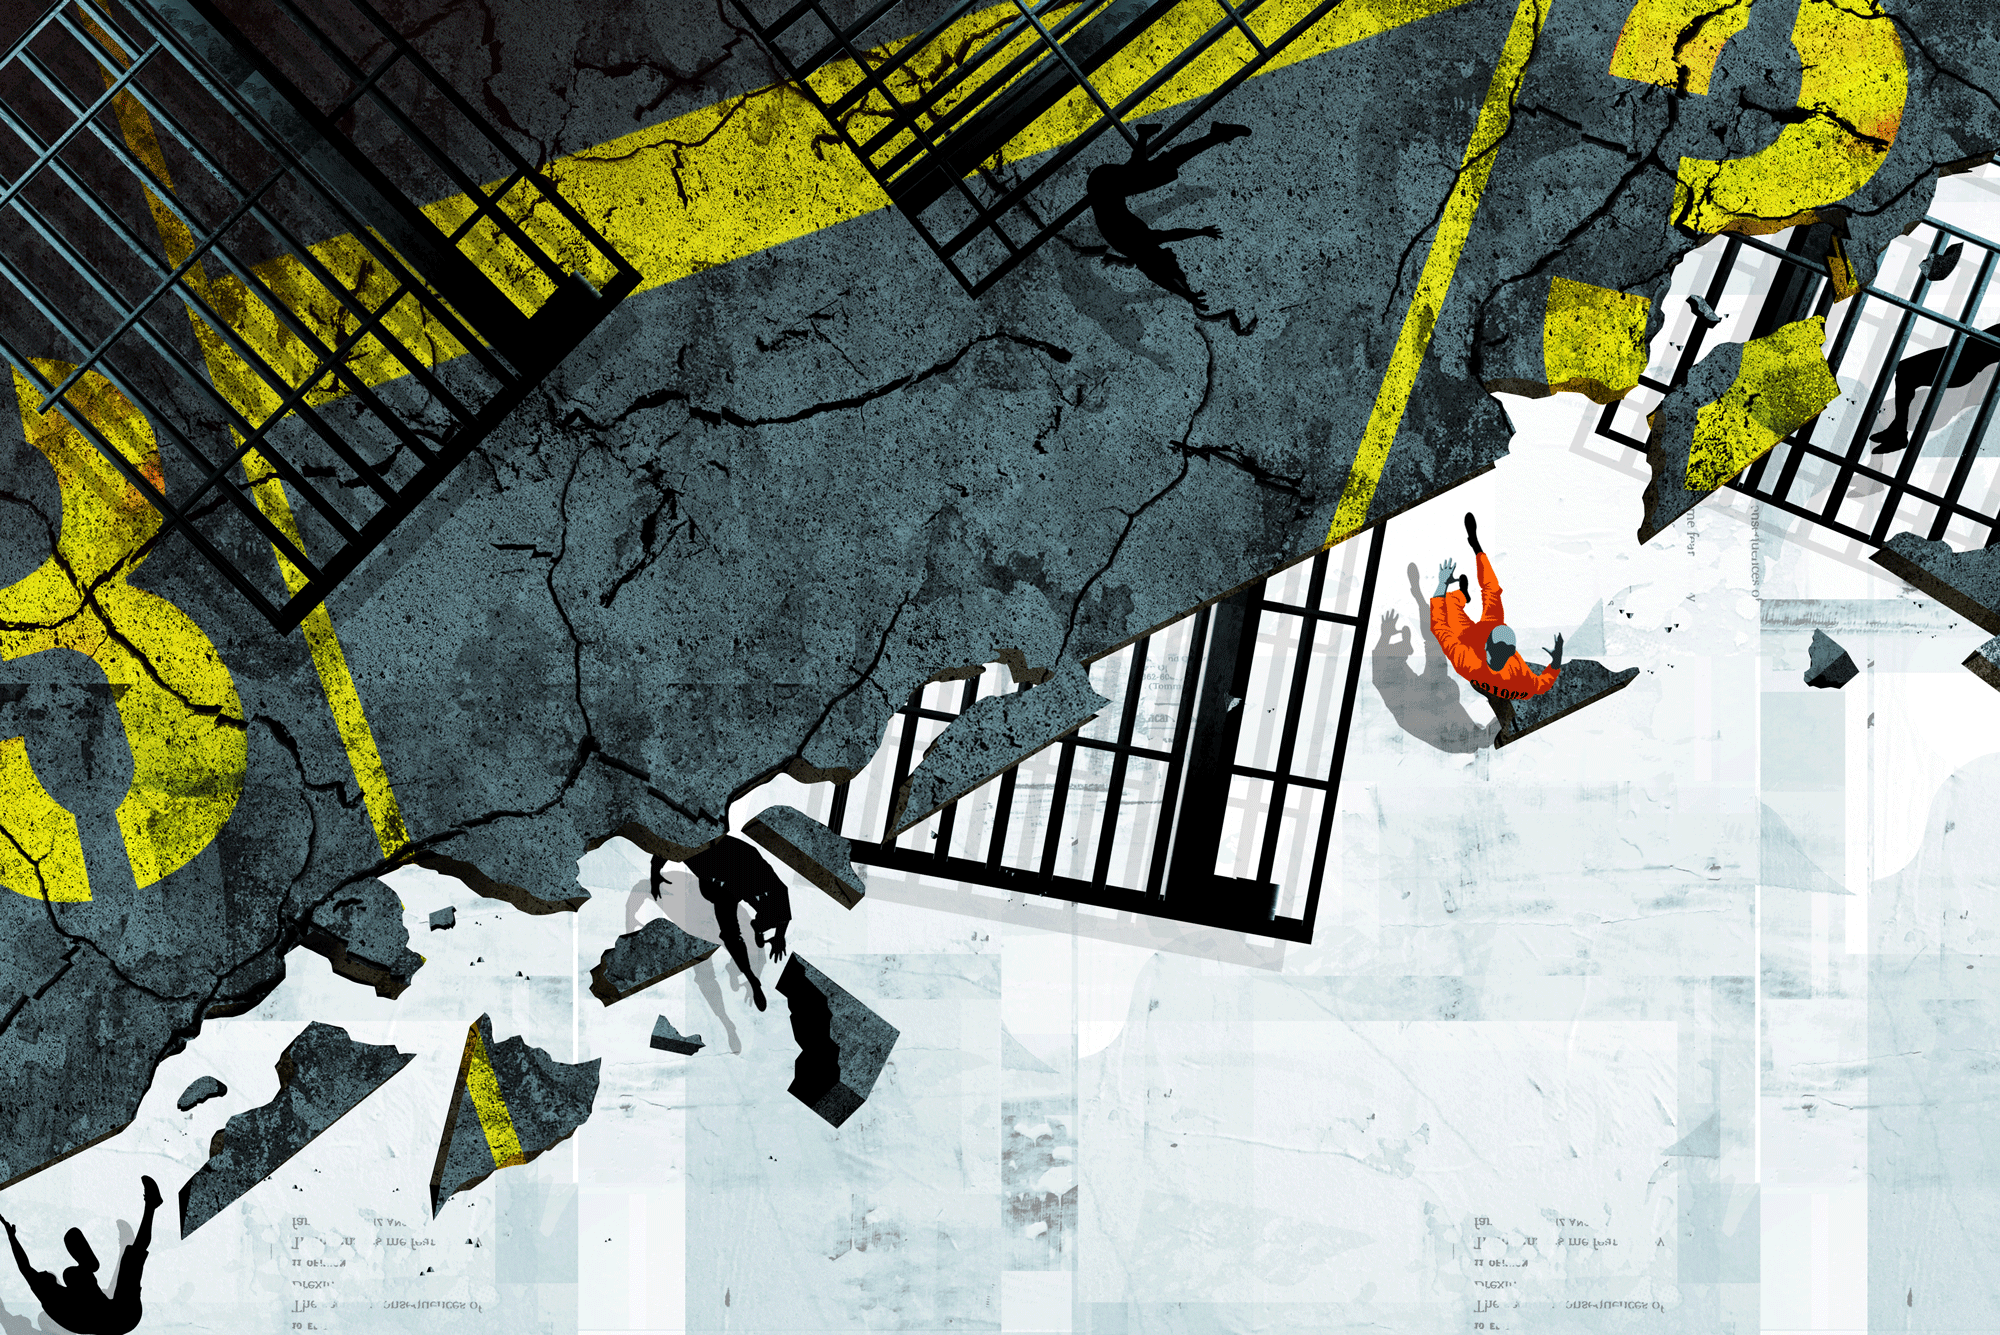 An abstract illustration depicting a broken prison stystem